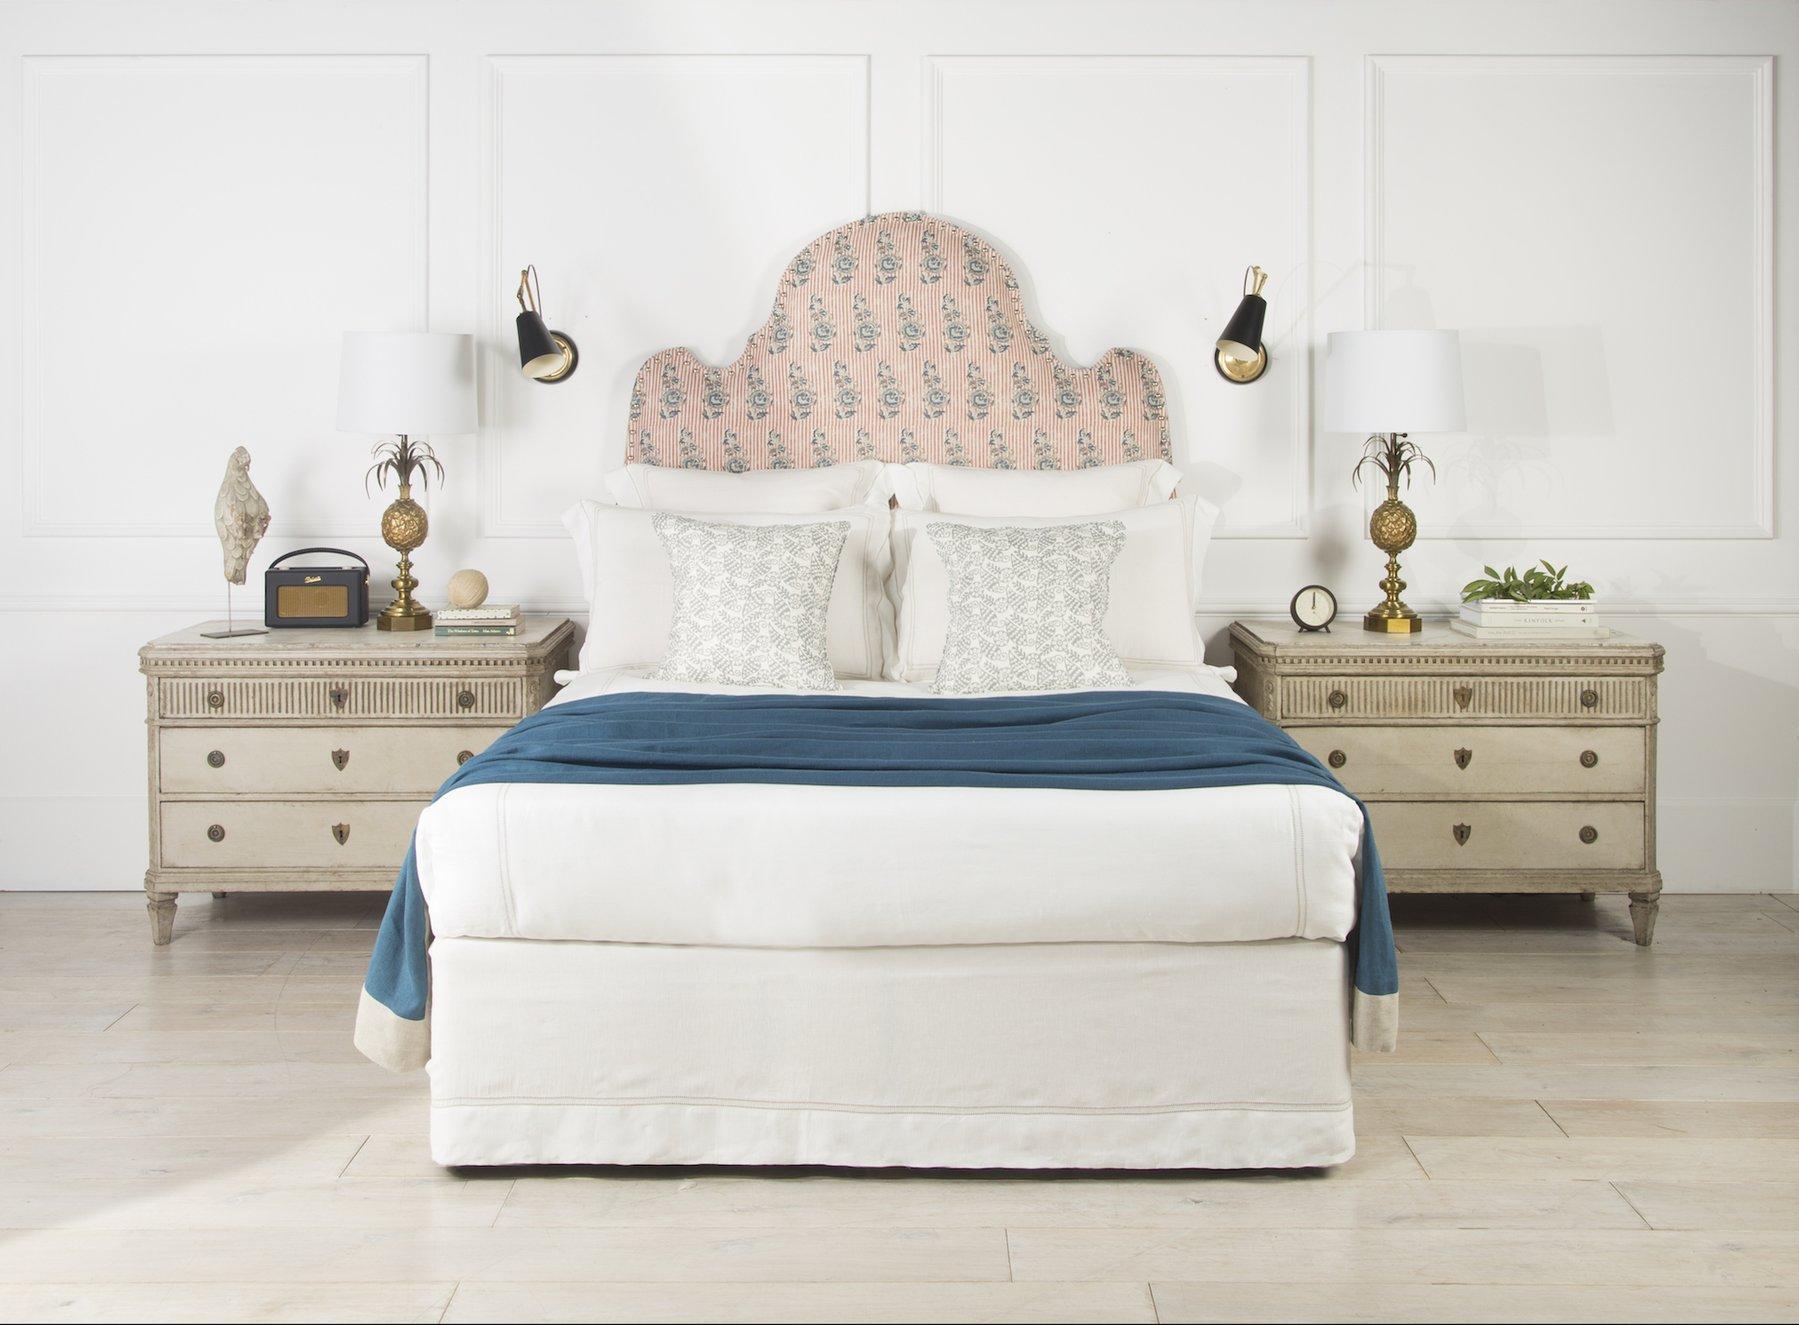 *** Featured in The Times 'The best headboards to brighten up your bedroom' ***

Made to order from our Lorfords Contemporary collection, the Jaipur is a grand profile, luxury upholstered headboard, handmade to order in our Cotswold upholstery